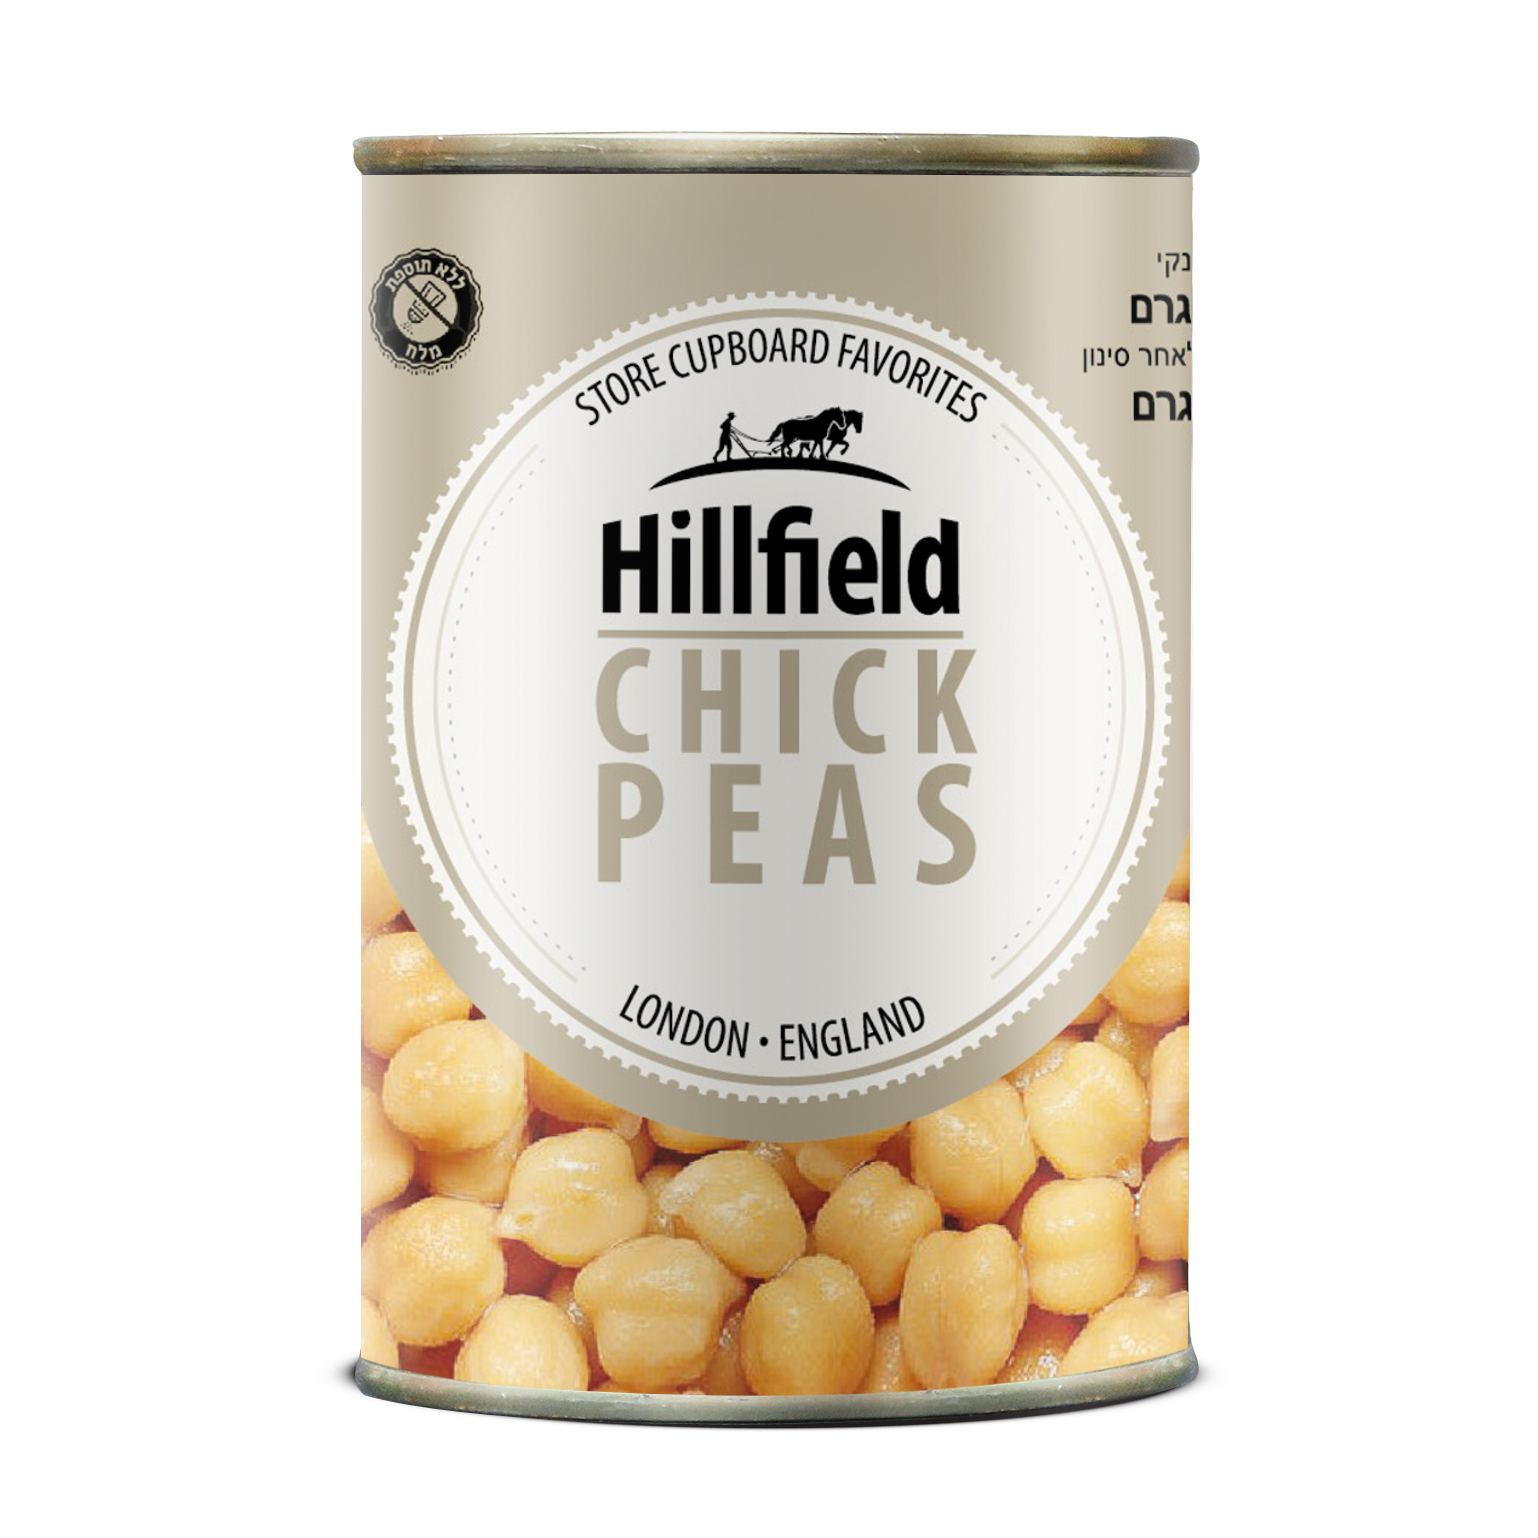 Hillfield Baked beans in tomato sauce, Italy, Legummes, Ready to eat, instant food, Coppola Foods